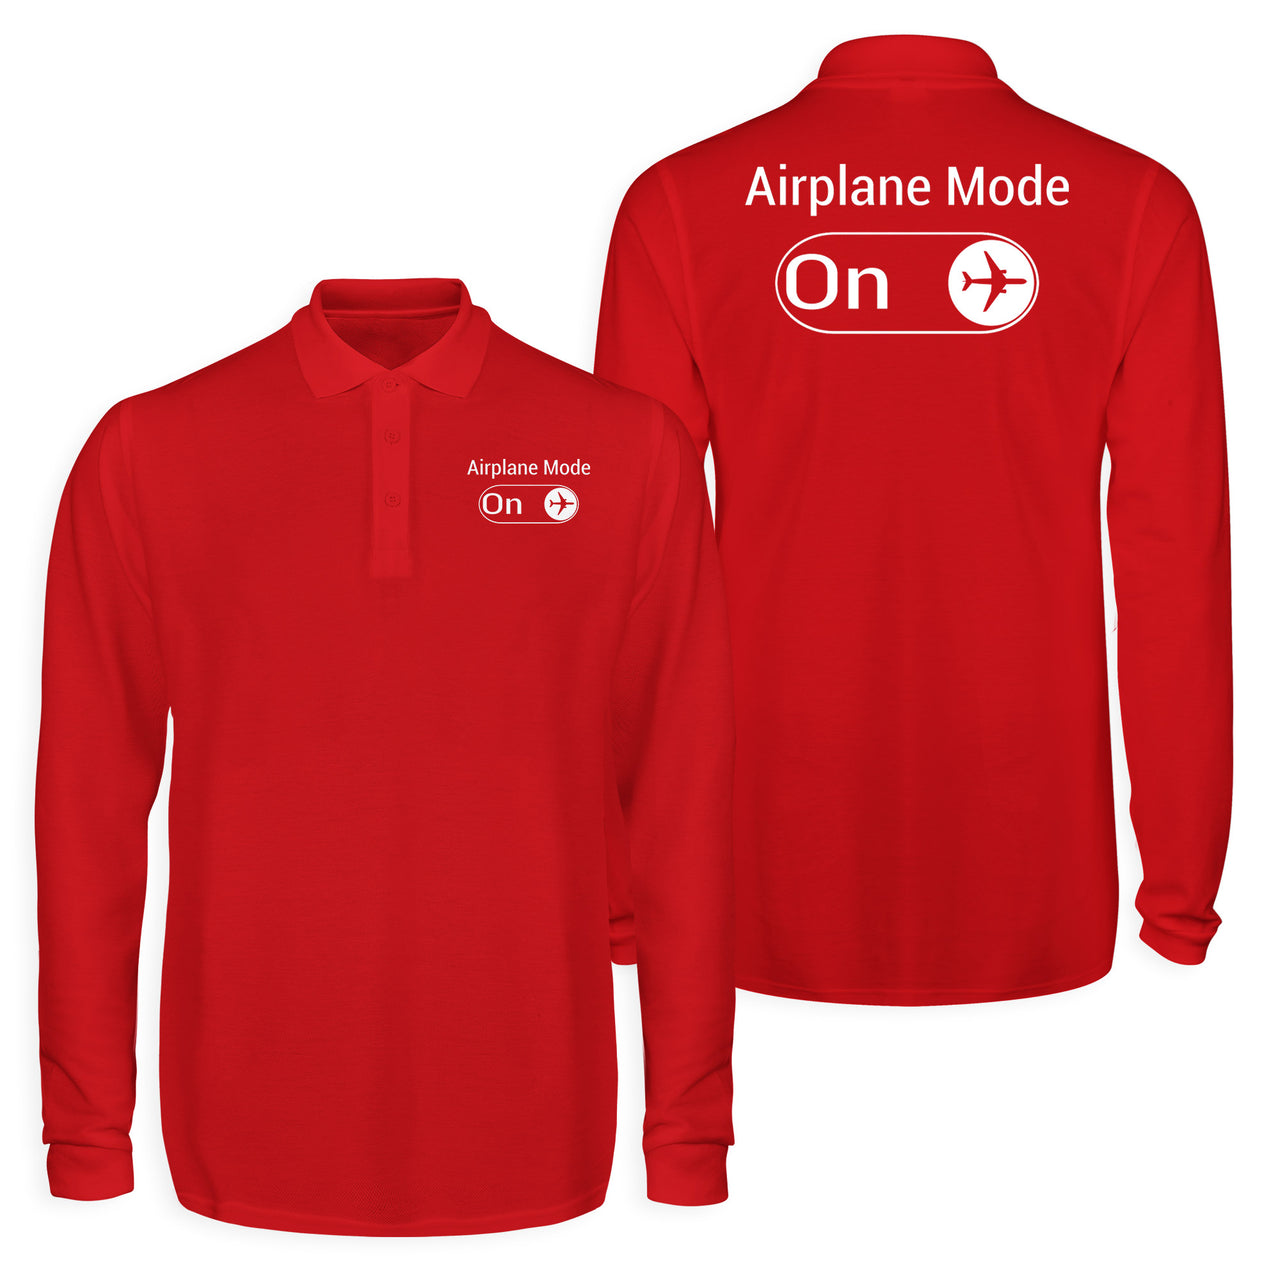 Airplane Mode On Designed Long Sleeve Polo T-Shirts (Double-Side)